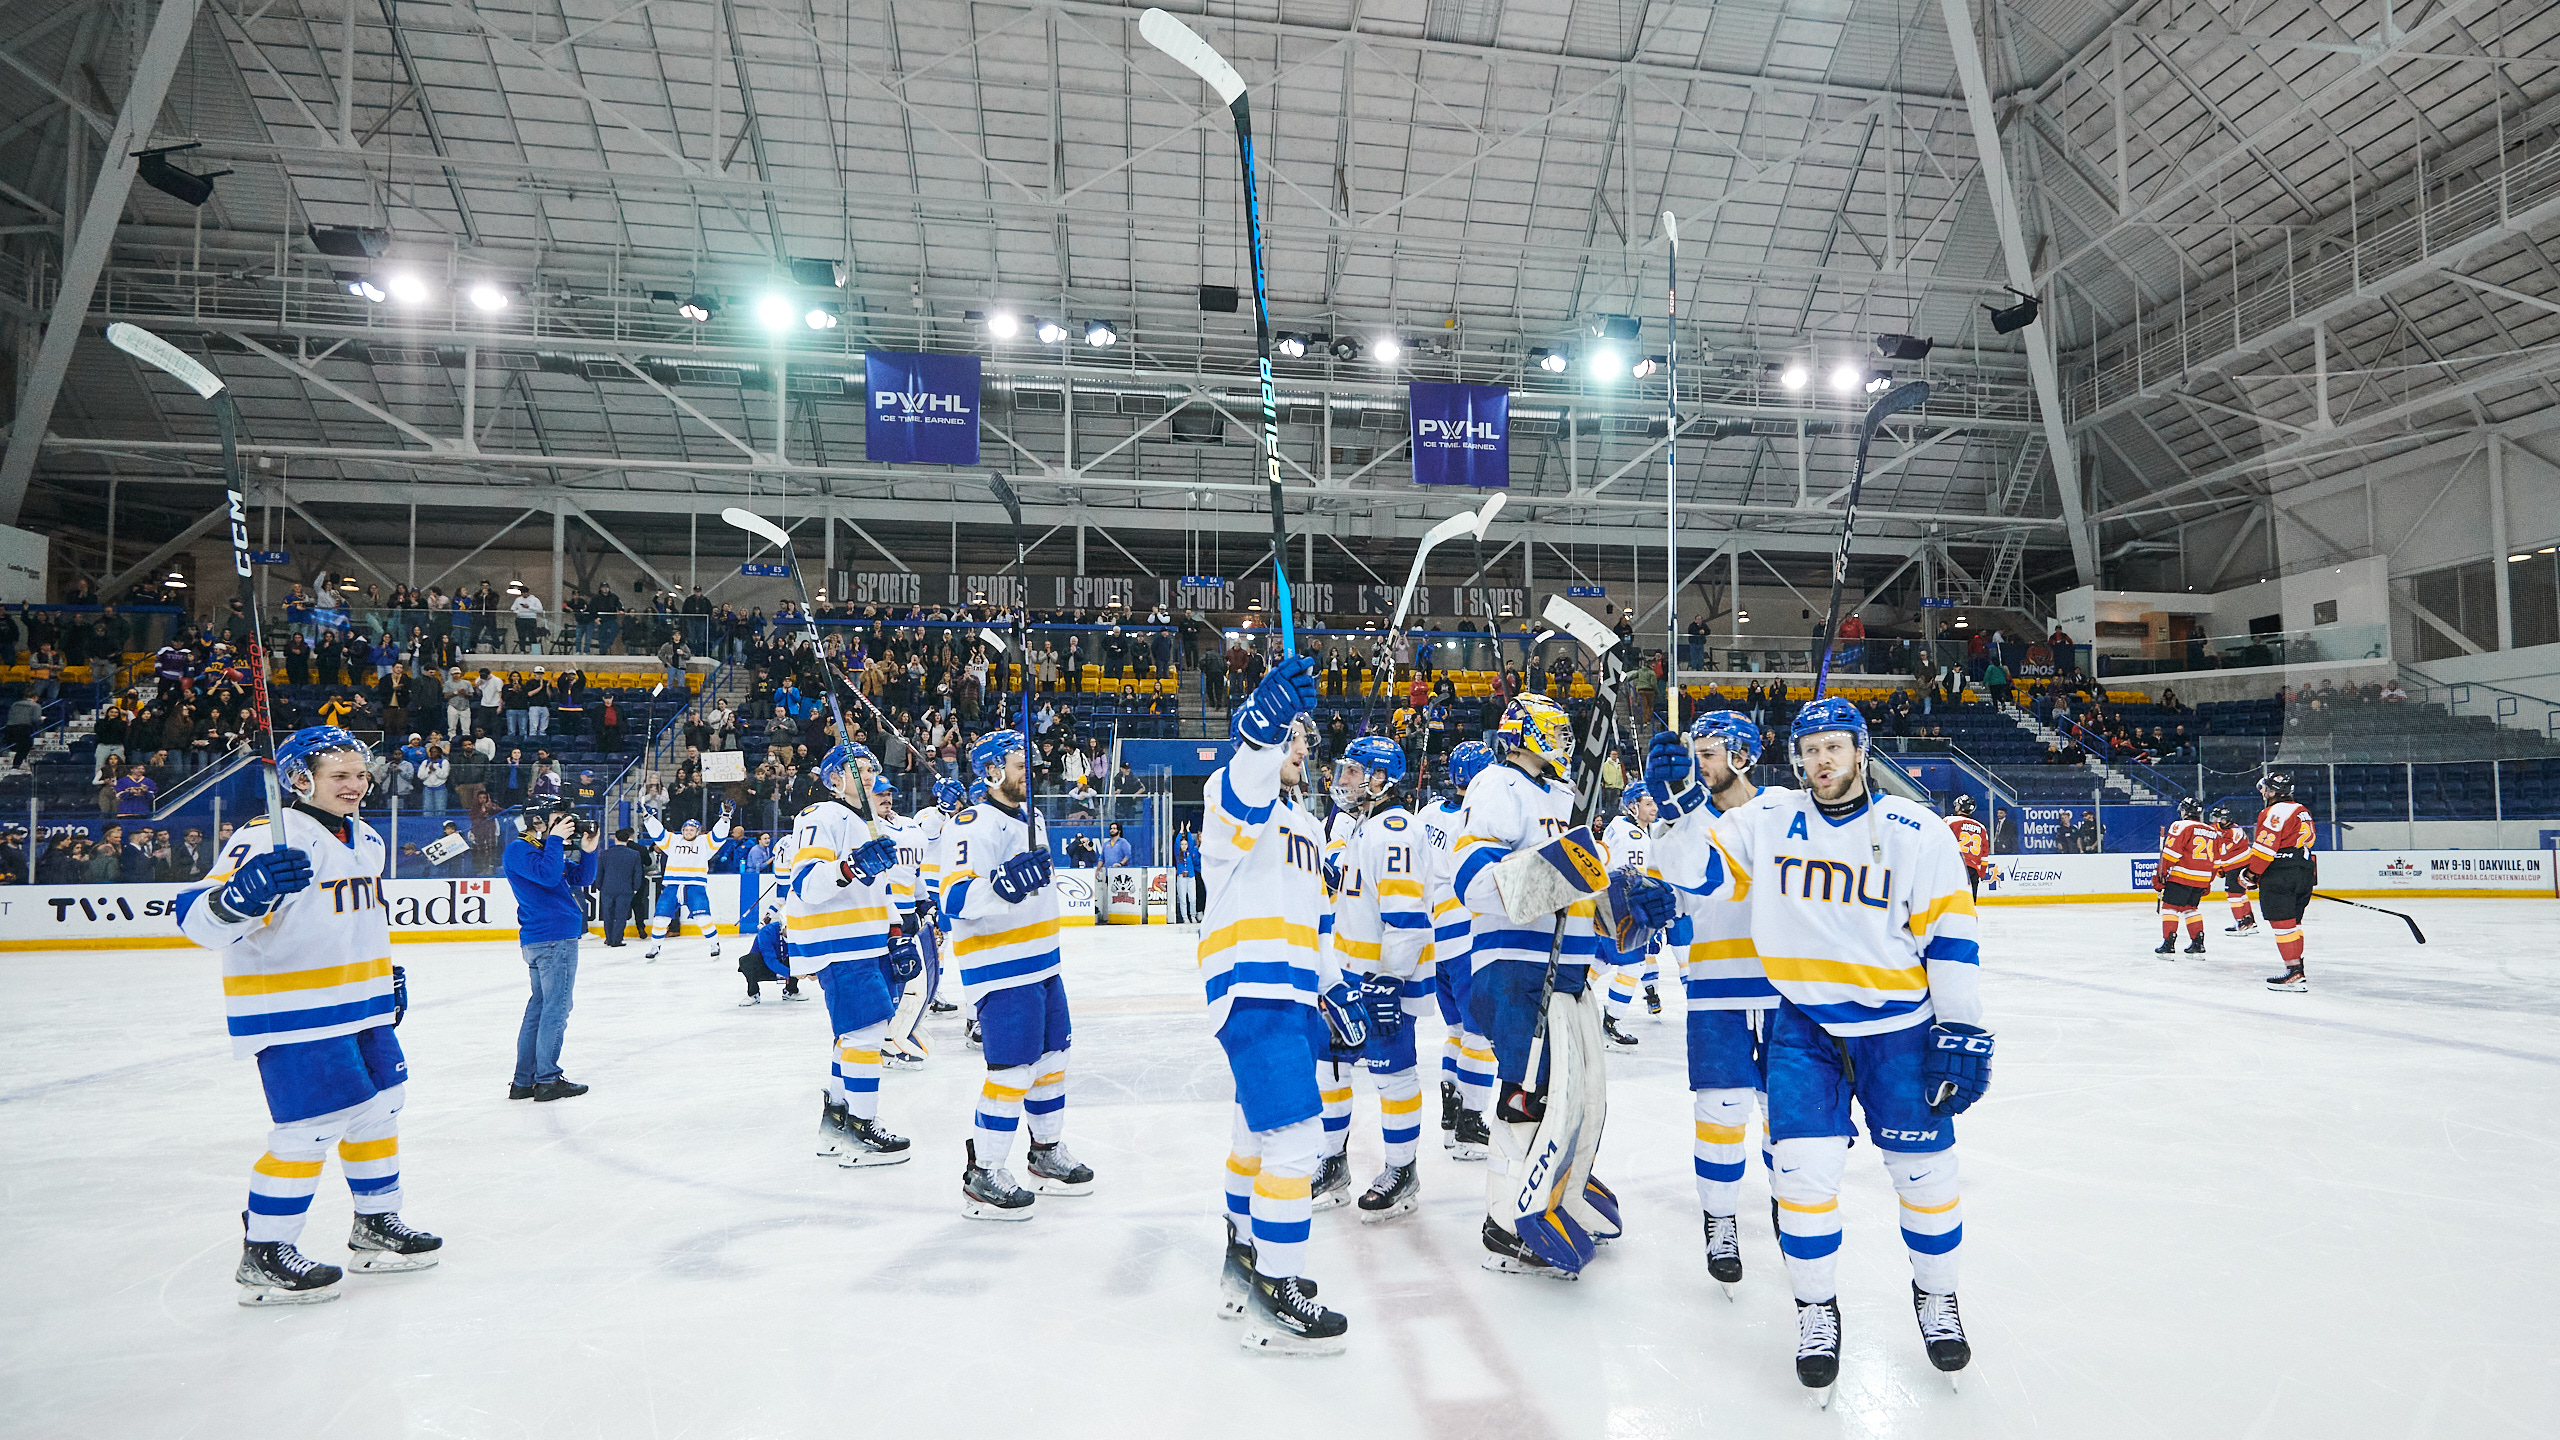 The hockey team hold their sticks in the air after a win